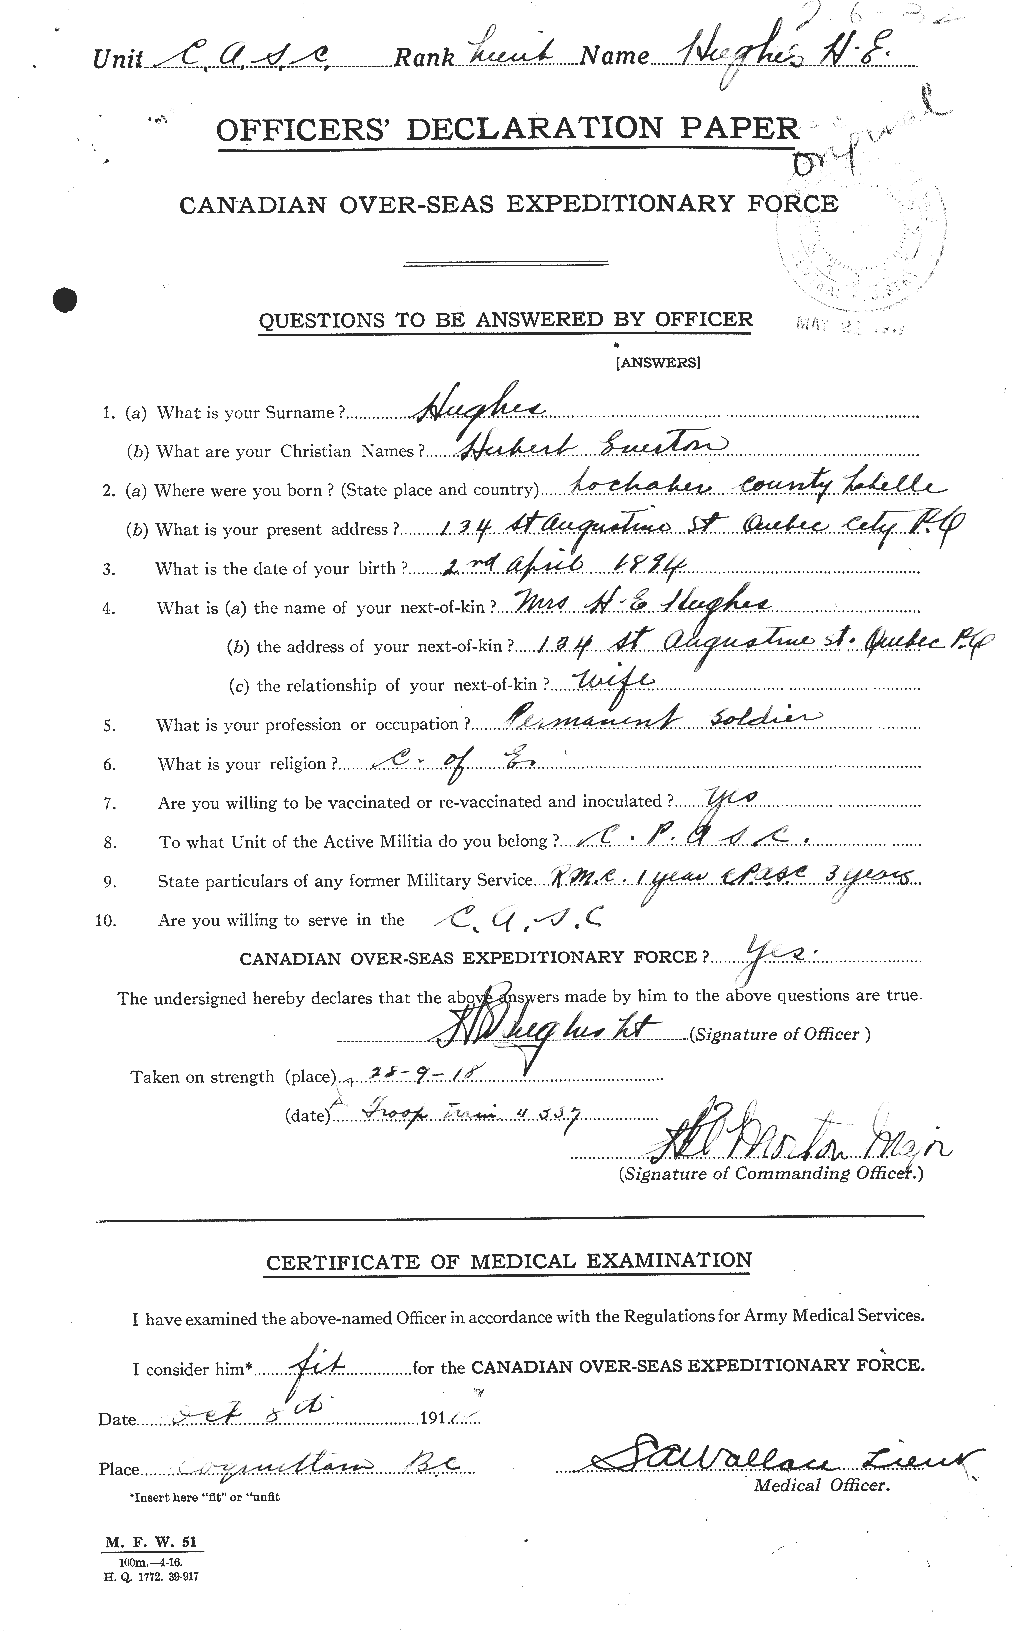 Personnel Records of the First World War - CEF 403914a